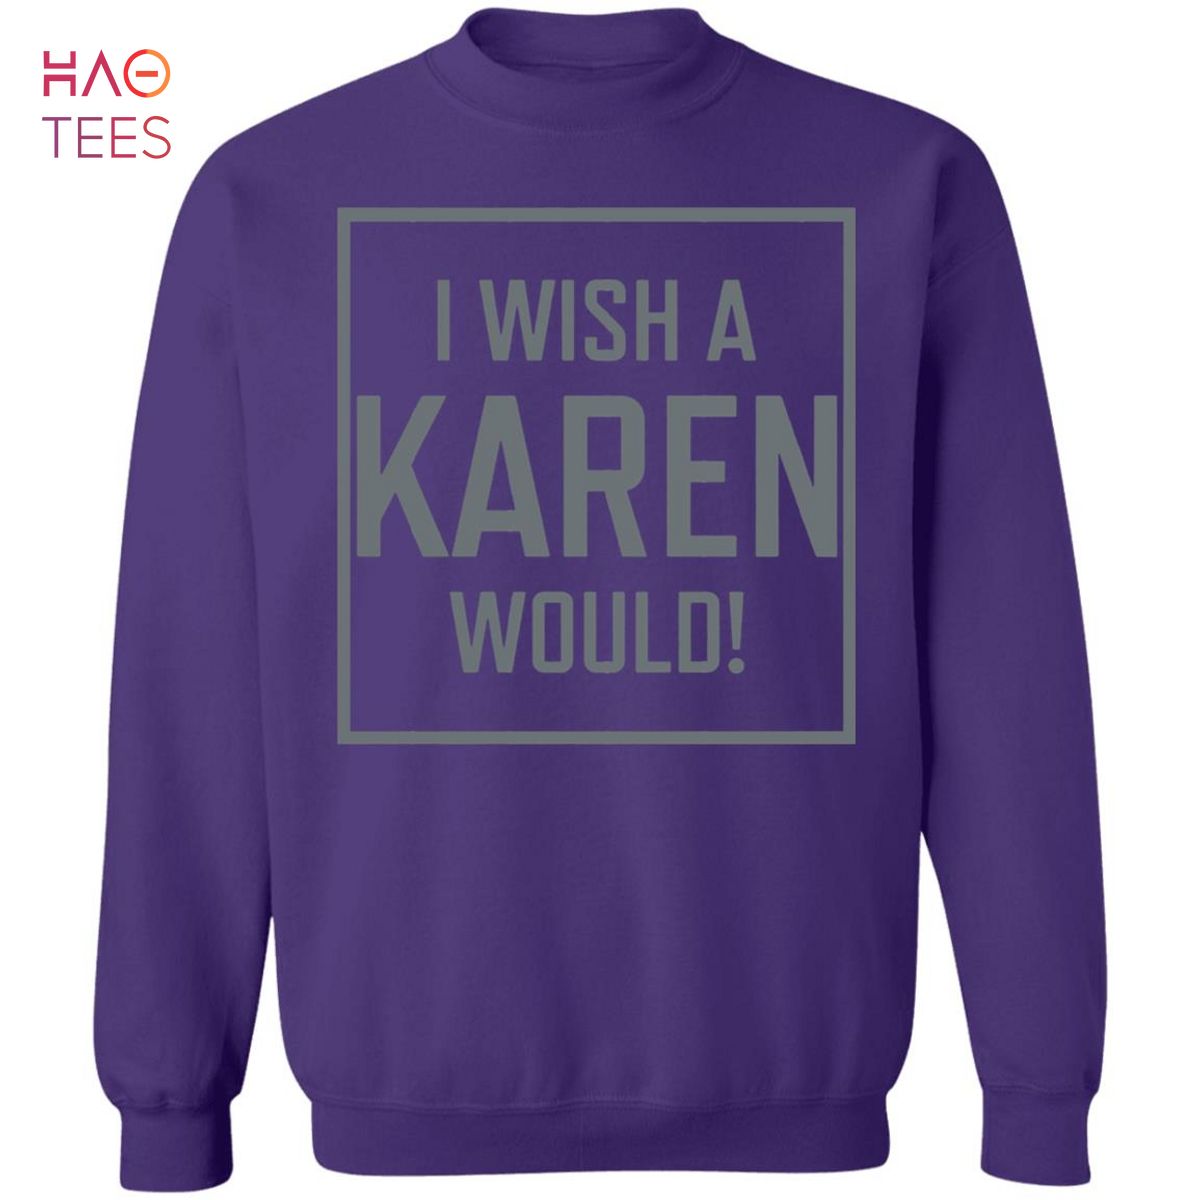 [NEW] I Wish A Karen Would Sweater